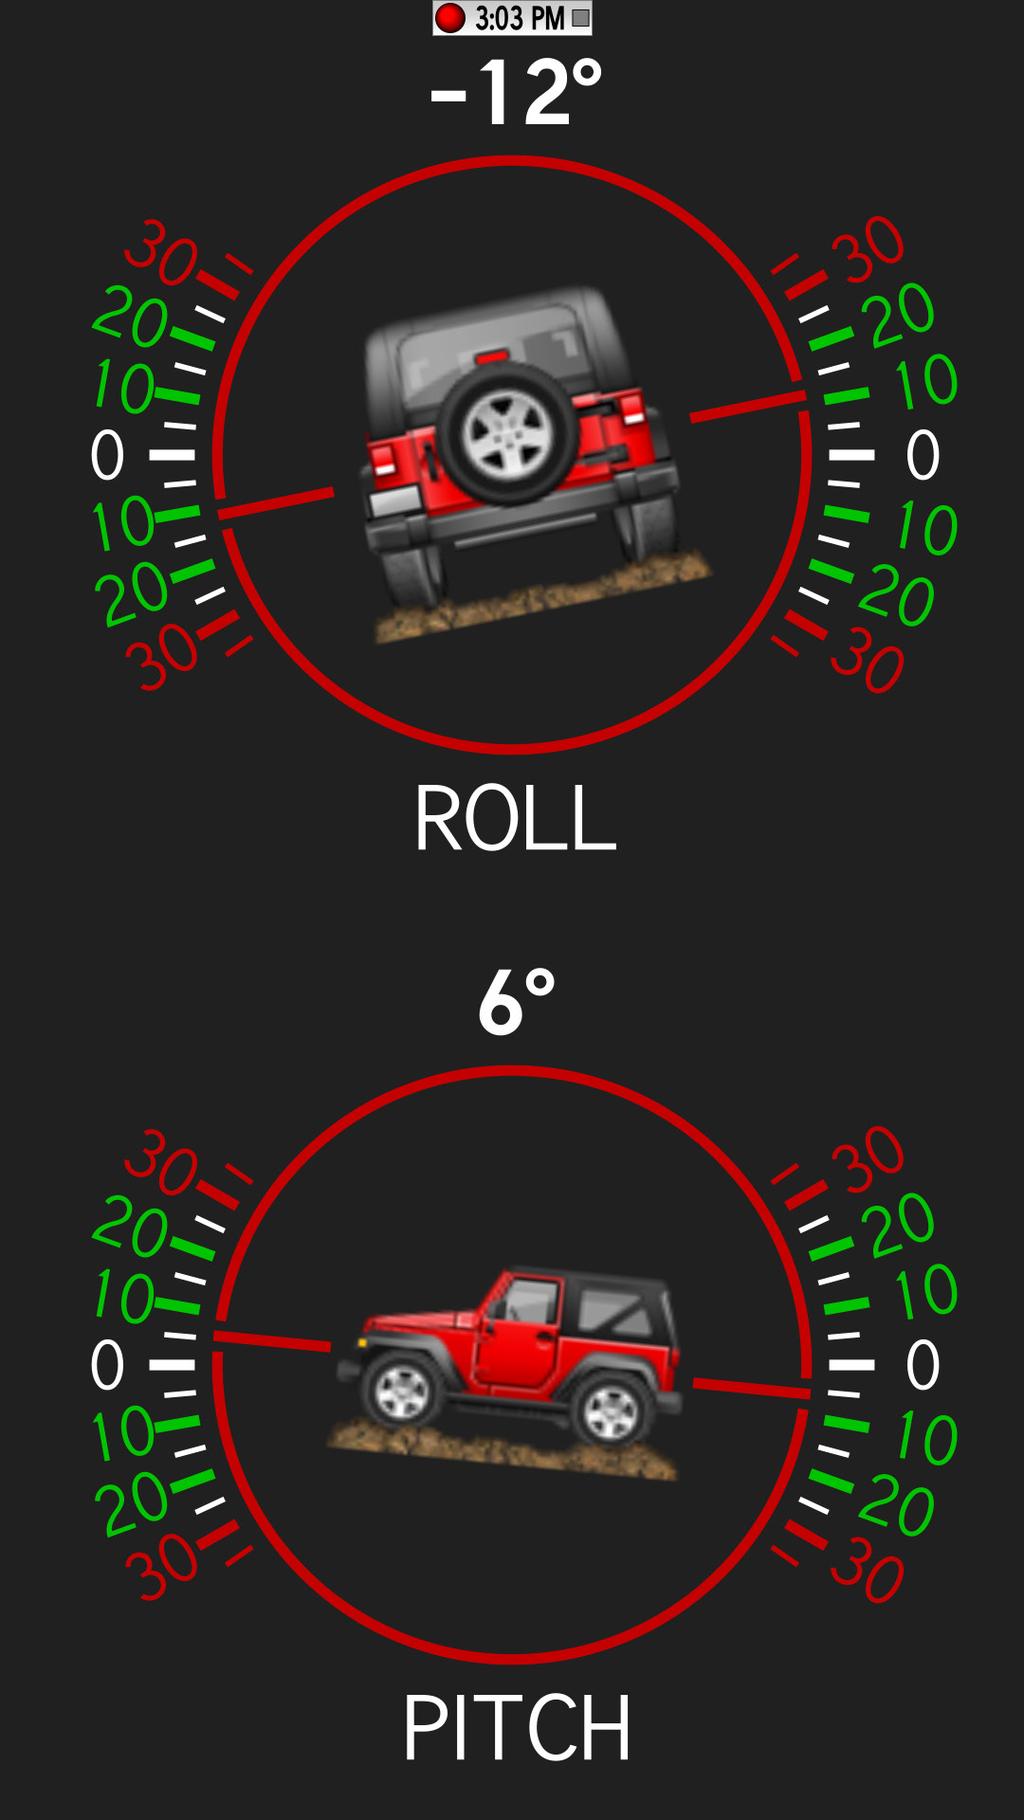 8 Inclinometer This simple feature uses the accelerometer in your phone to calculate